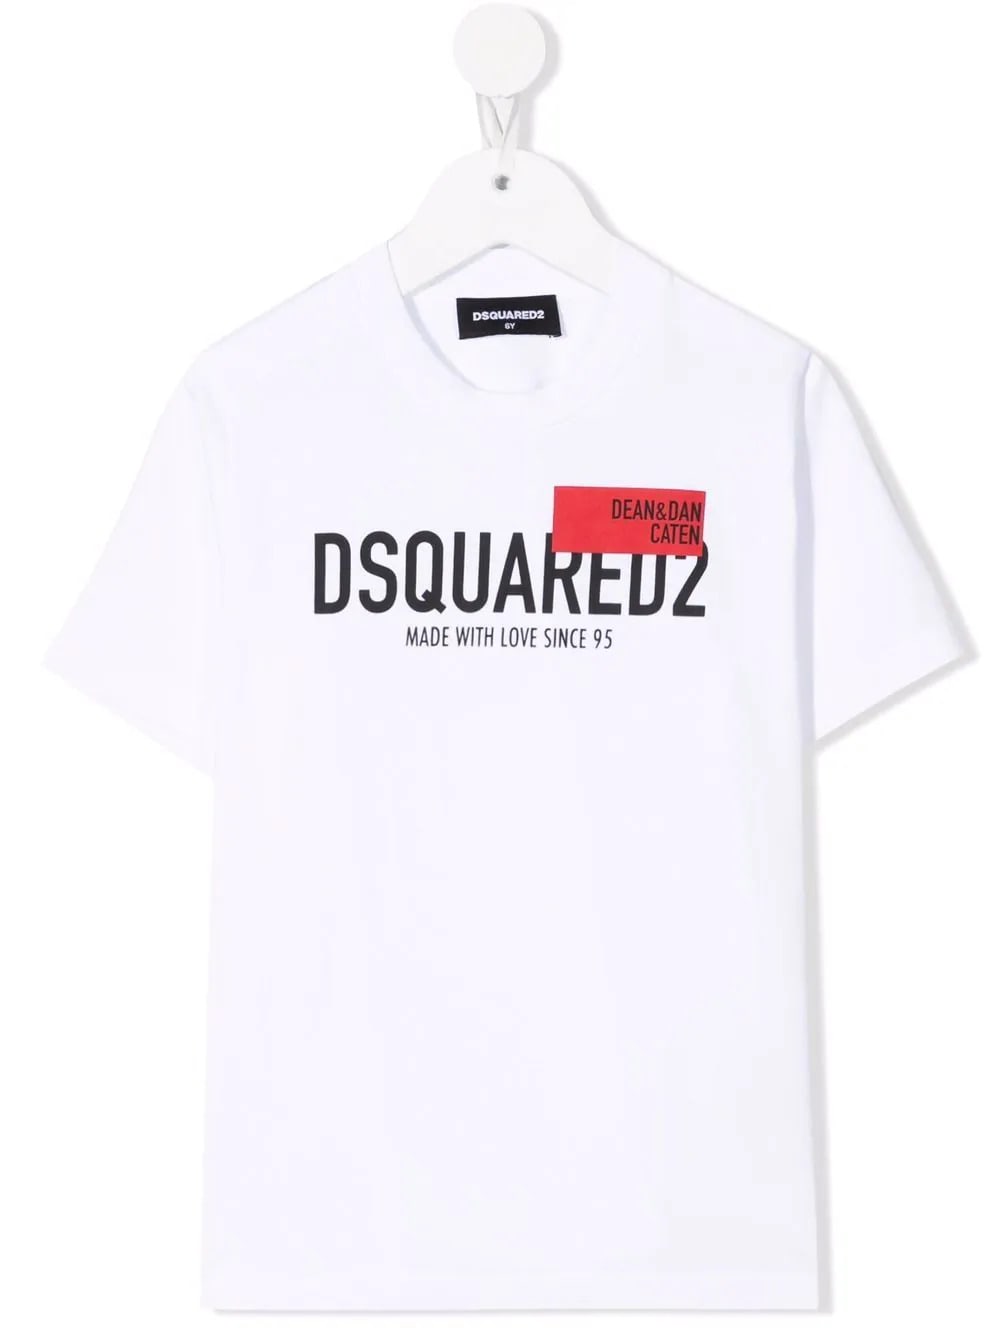 Kids White T-shirt With Dsquared2 made With Love Print